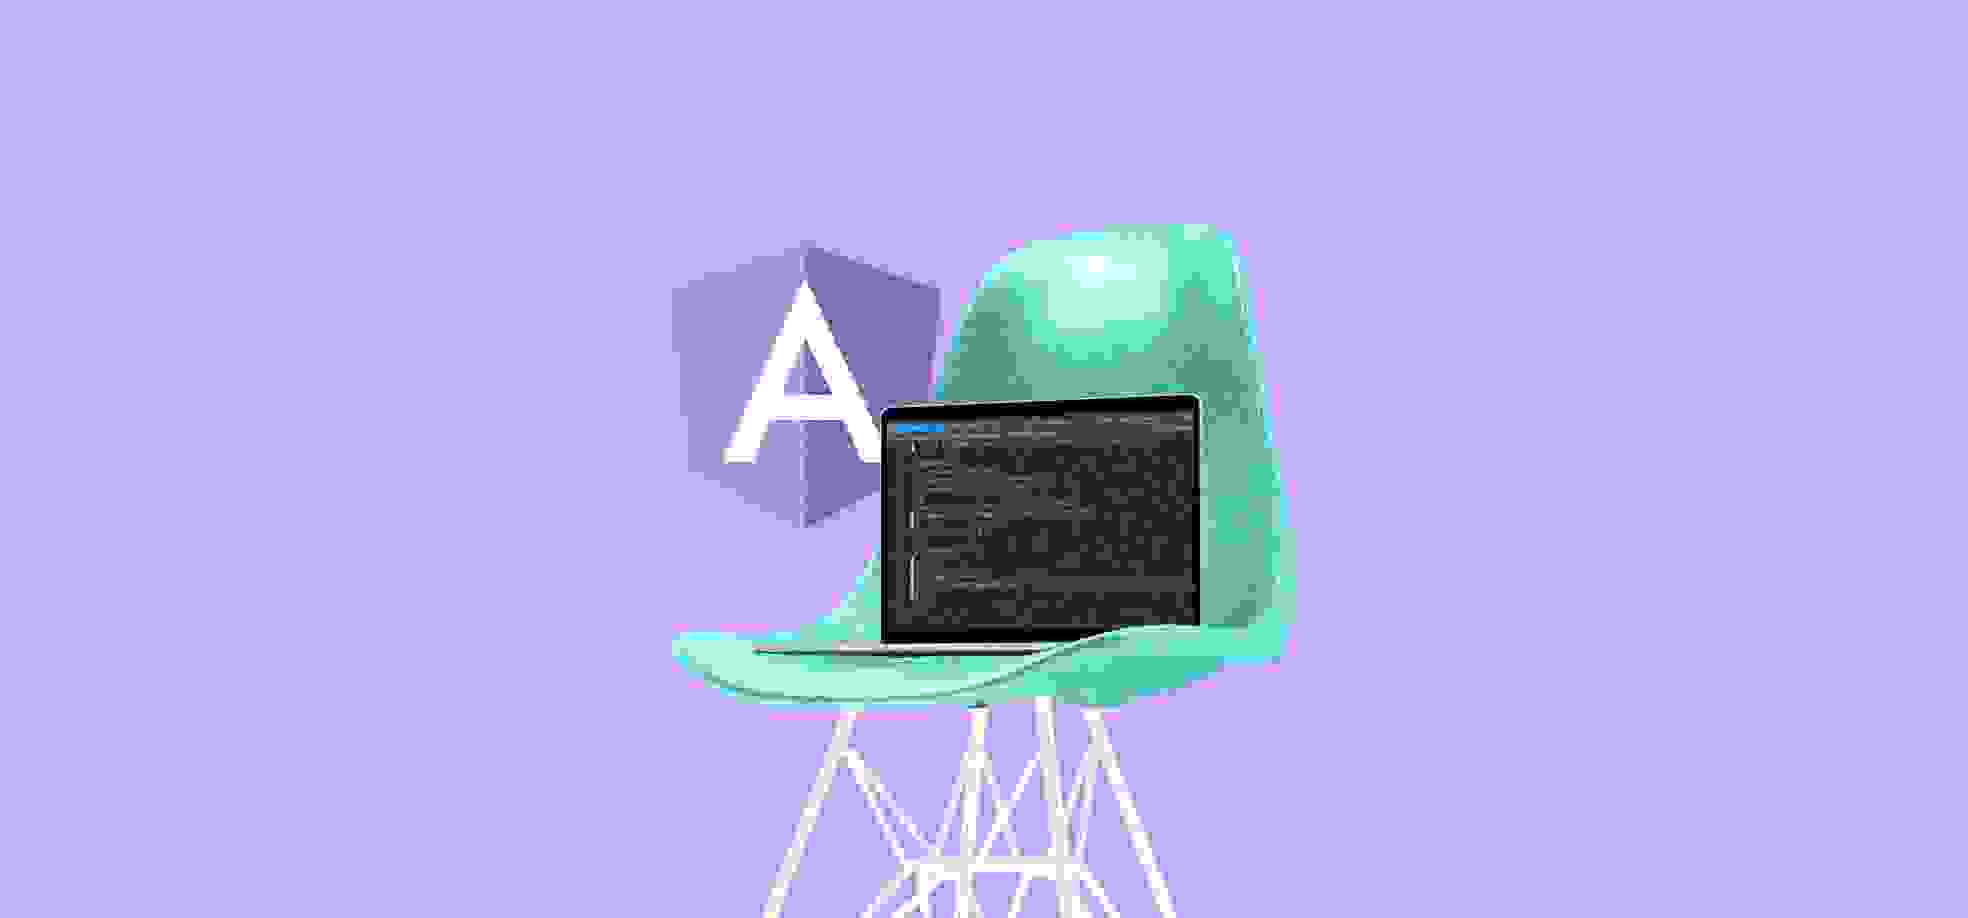 Chair with laptop on it illustration